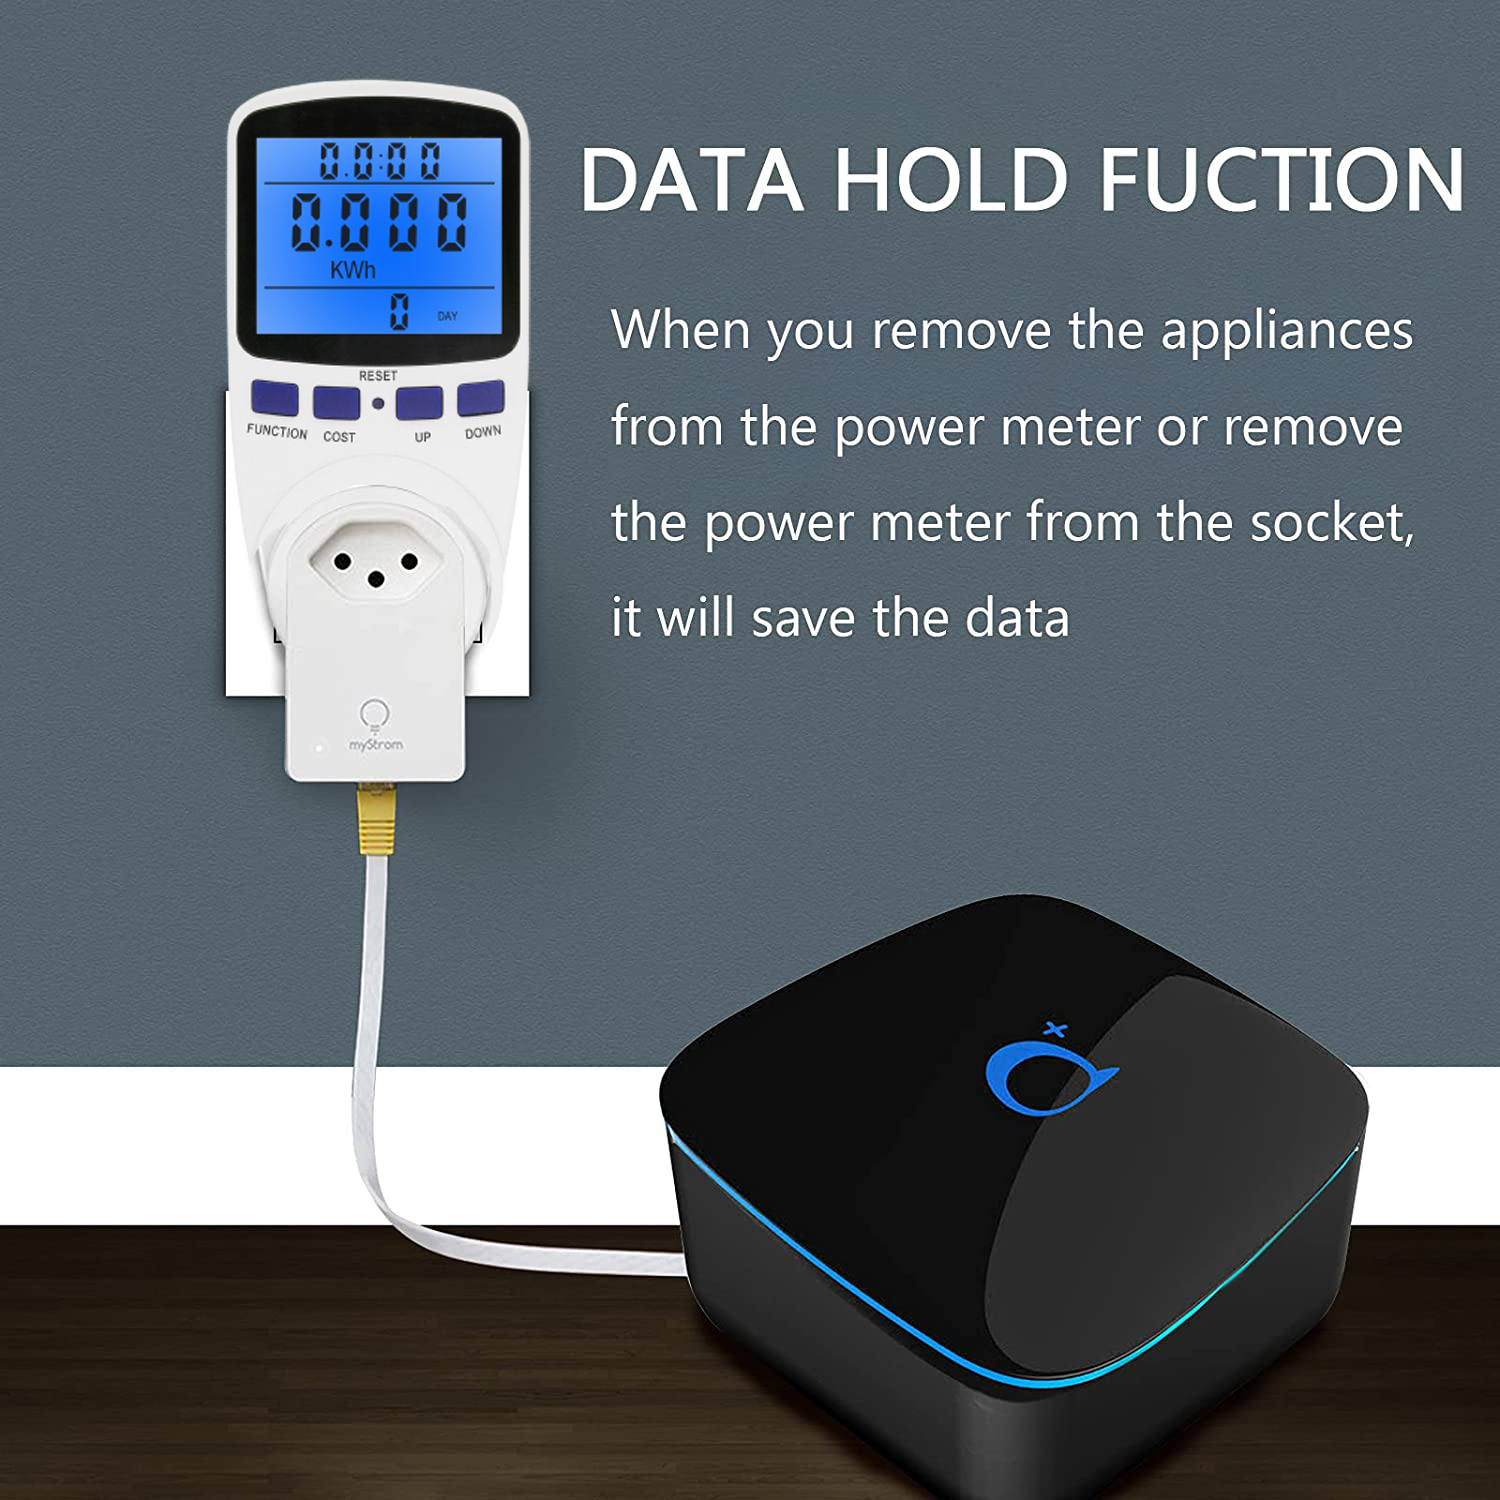 Data Hold Fuction It Will Save The Data